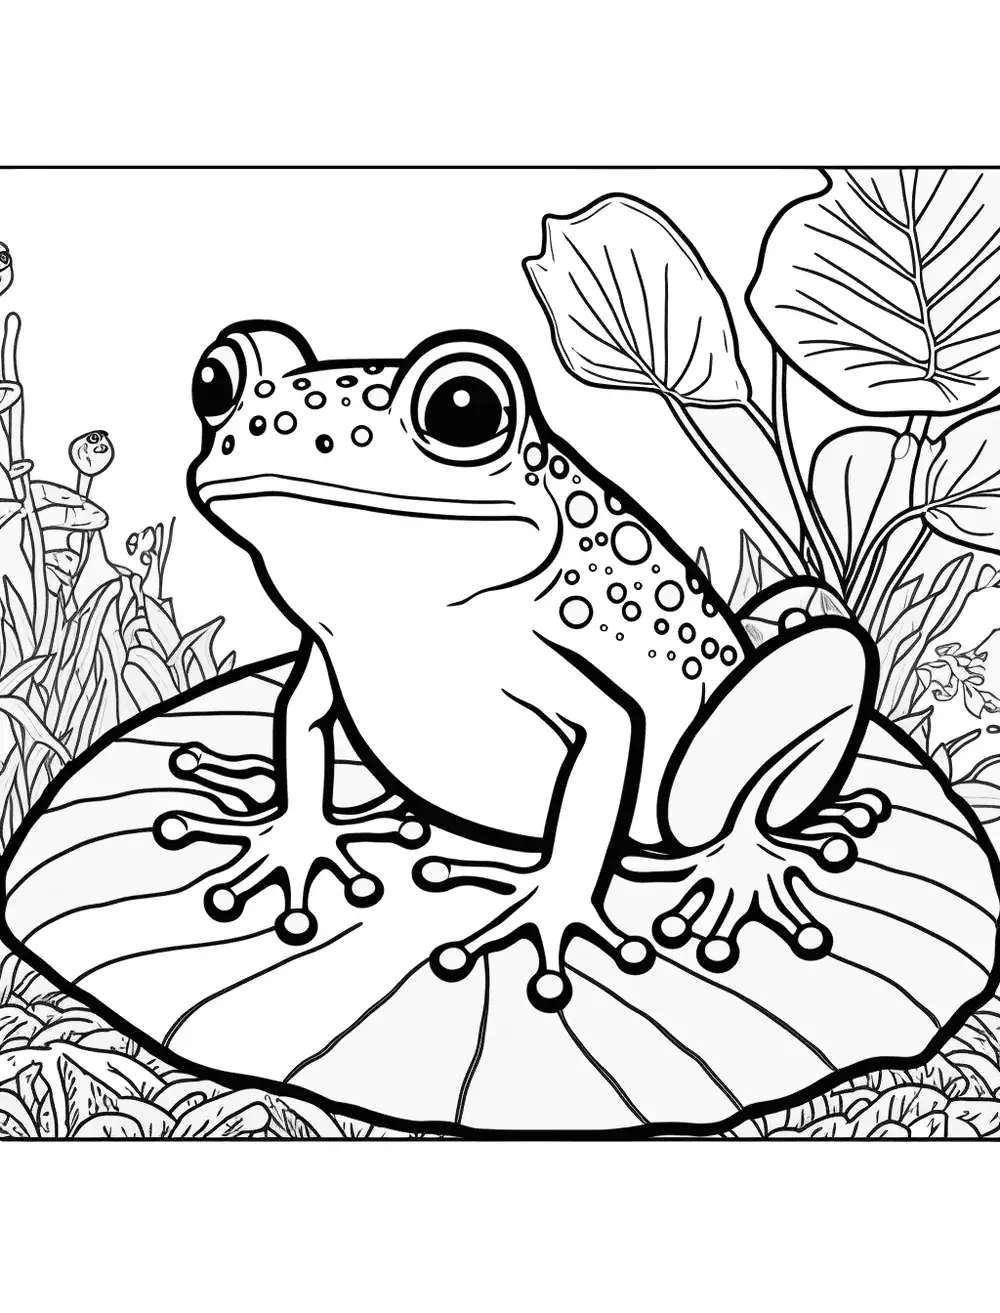 Rain Forest Frog Coloring Page - A frog in a lush, tropical rainforest environment.